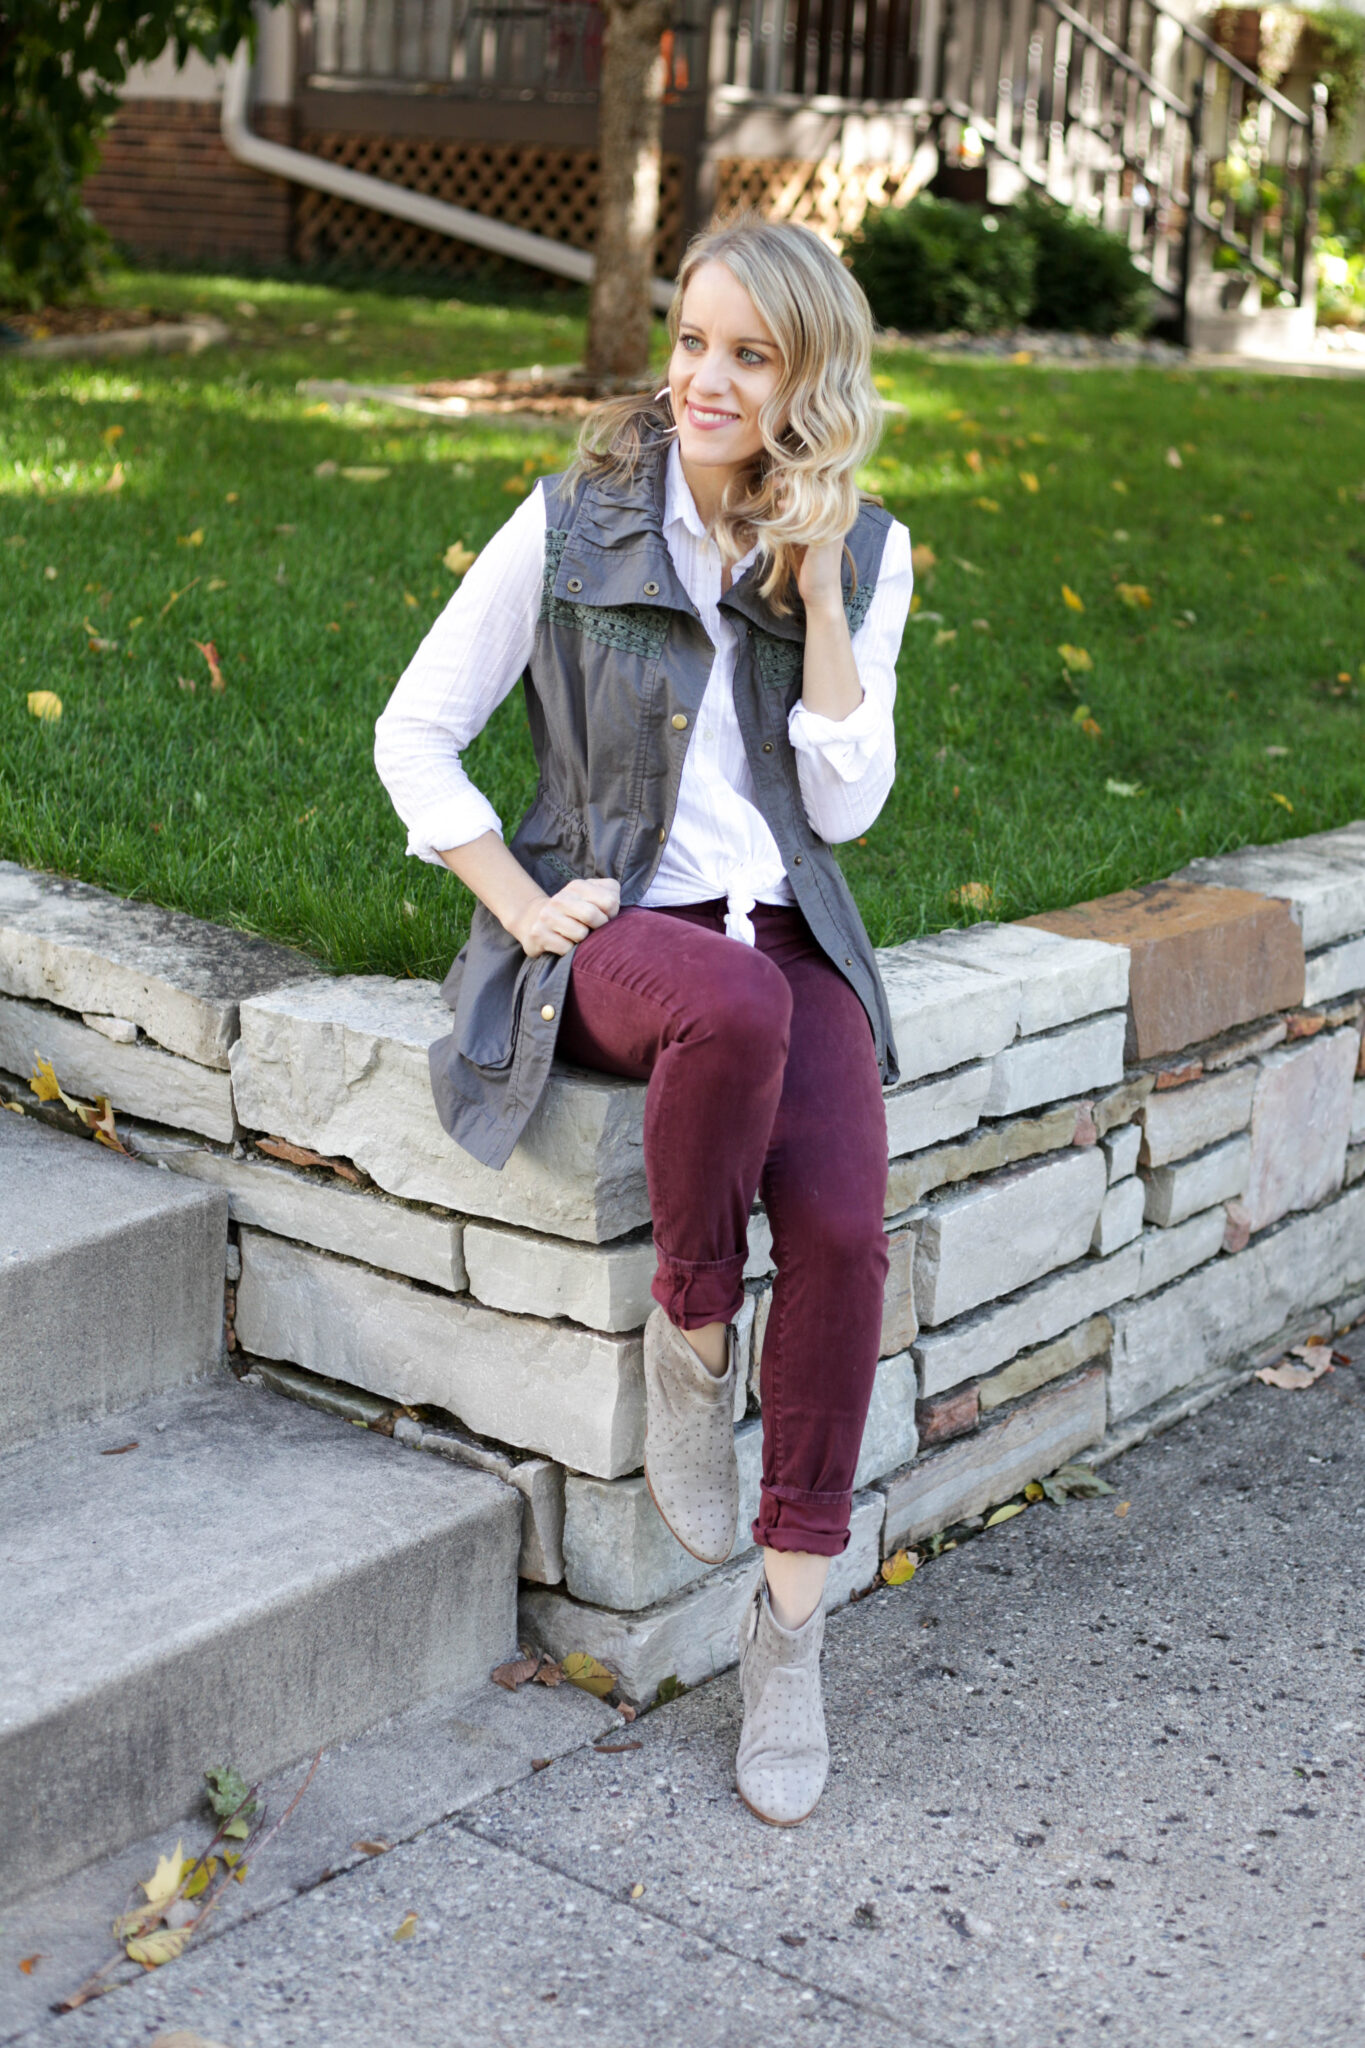 Button-up shirt with vest and burgundy pants